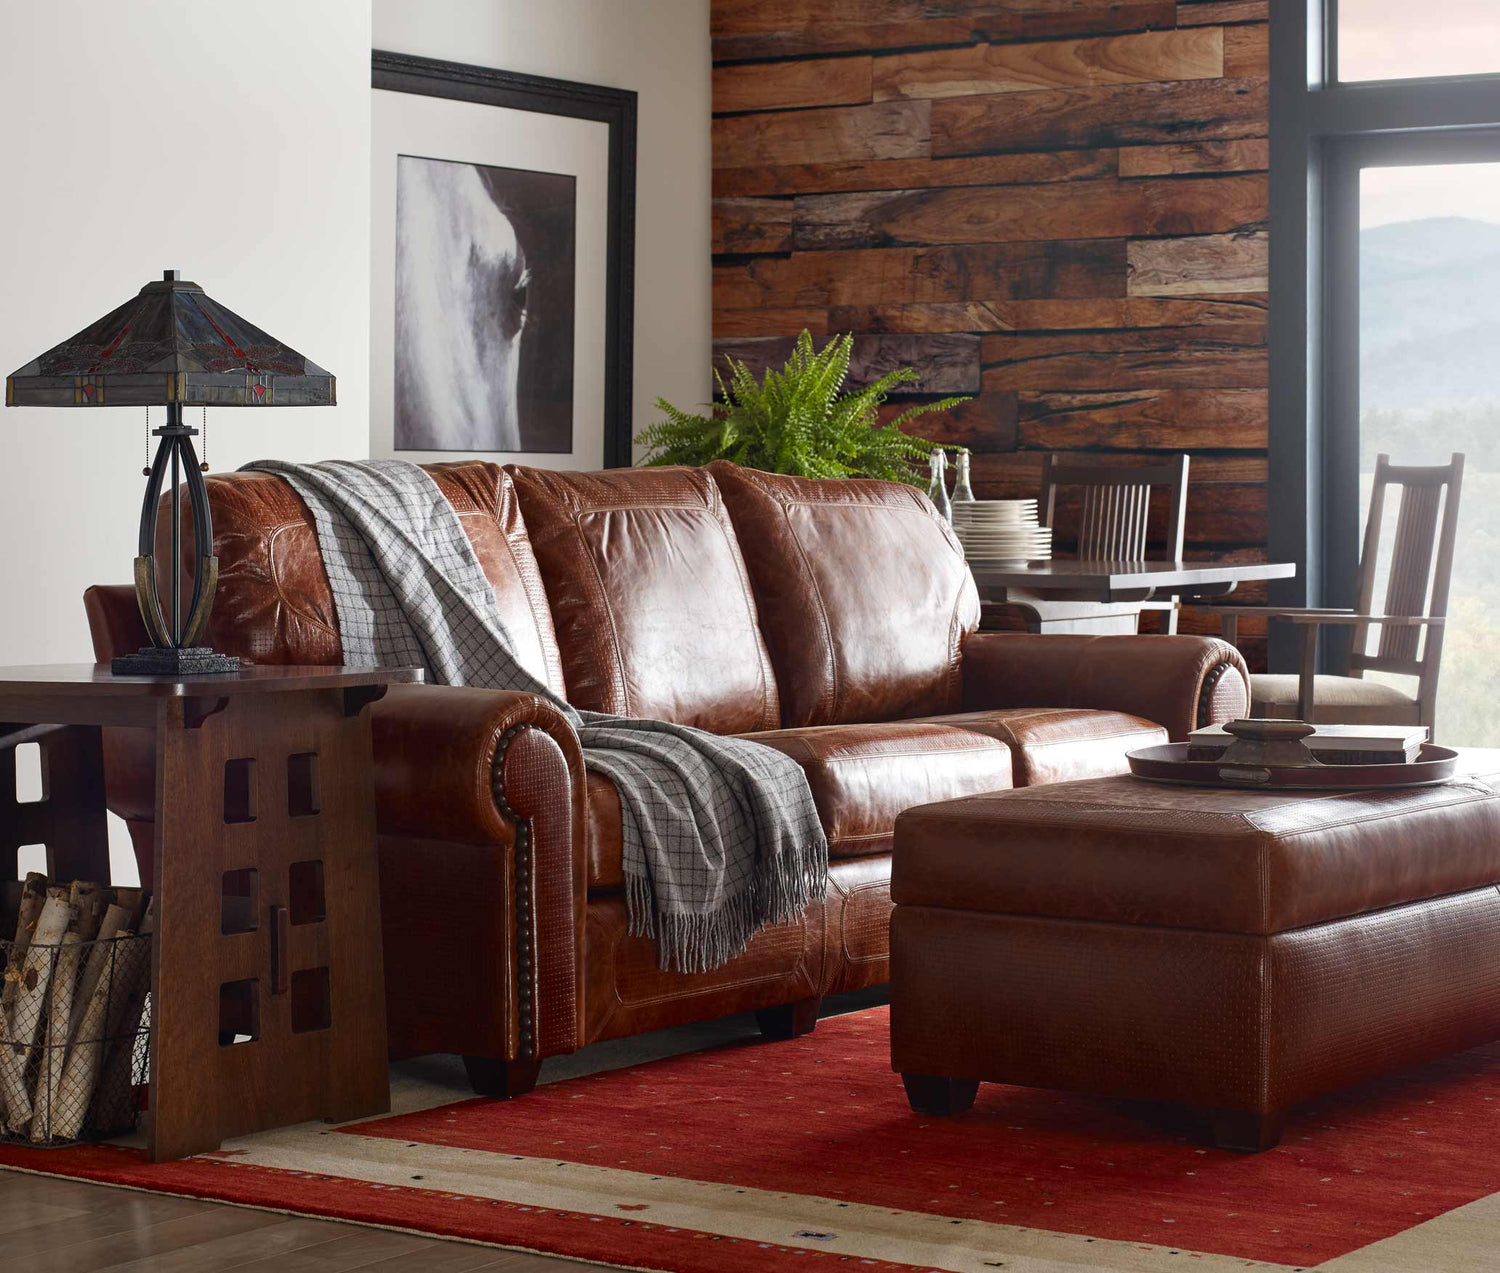 Lifestyle of a Santa Fe Sofa with a matching Santa Fe Ottoman in front of it, there is an end table to the side of the sofa with an iron lamp on top of it